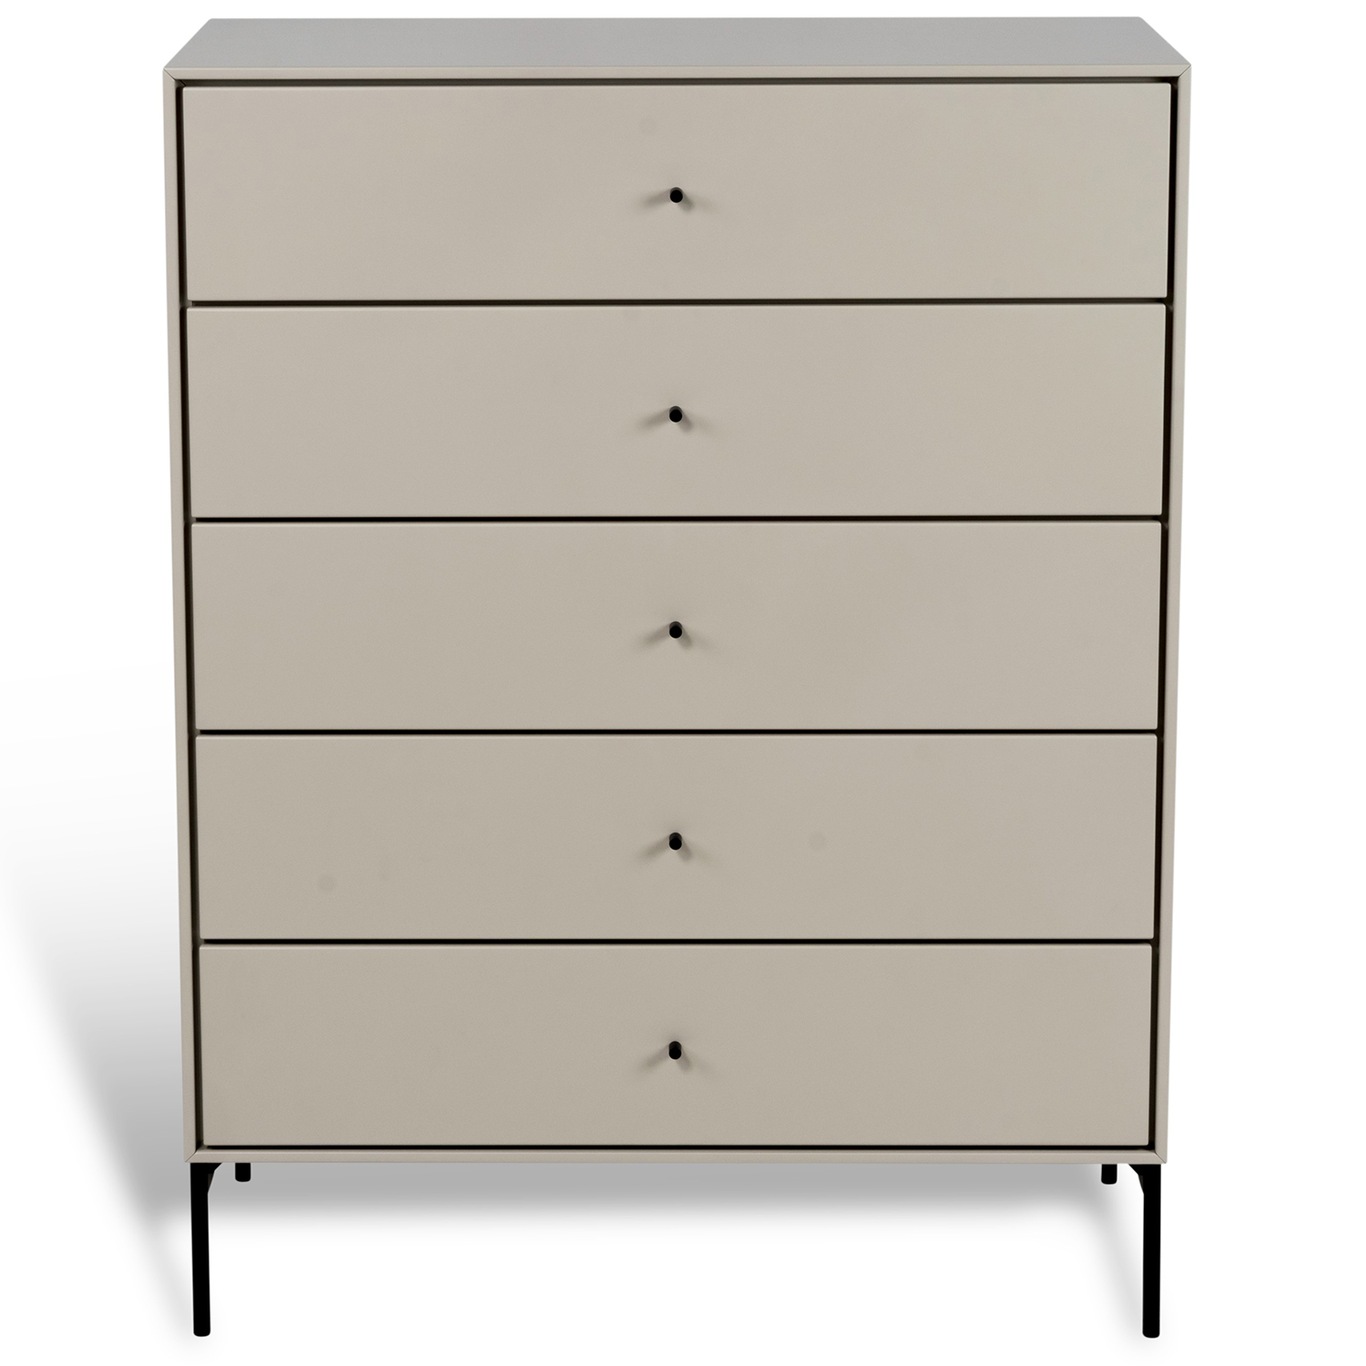 Volt Chest Of Drawers With 5 Drawers, Beige/Black